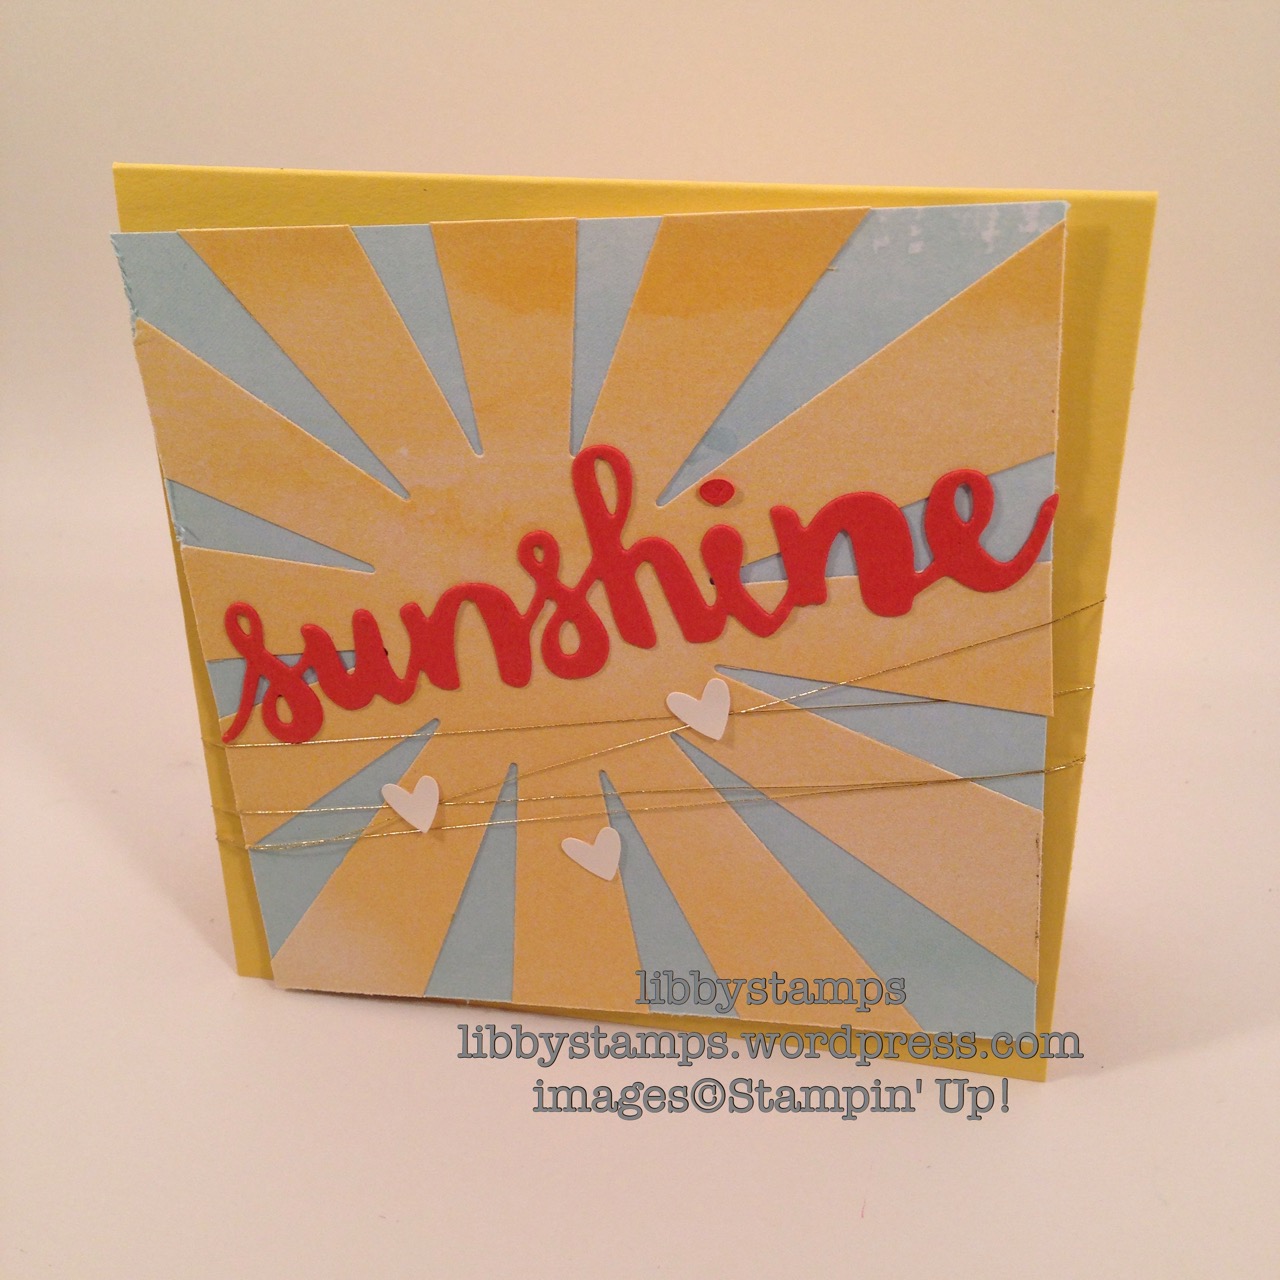 libbystamps, stampin up, Sunburst Thinlits, Sunshine Wishes Thinlits, Perfectly Artistic DSP, Owl Builder Punch, Sale-a-Bration 2016